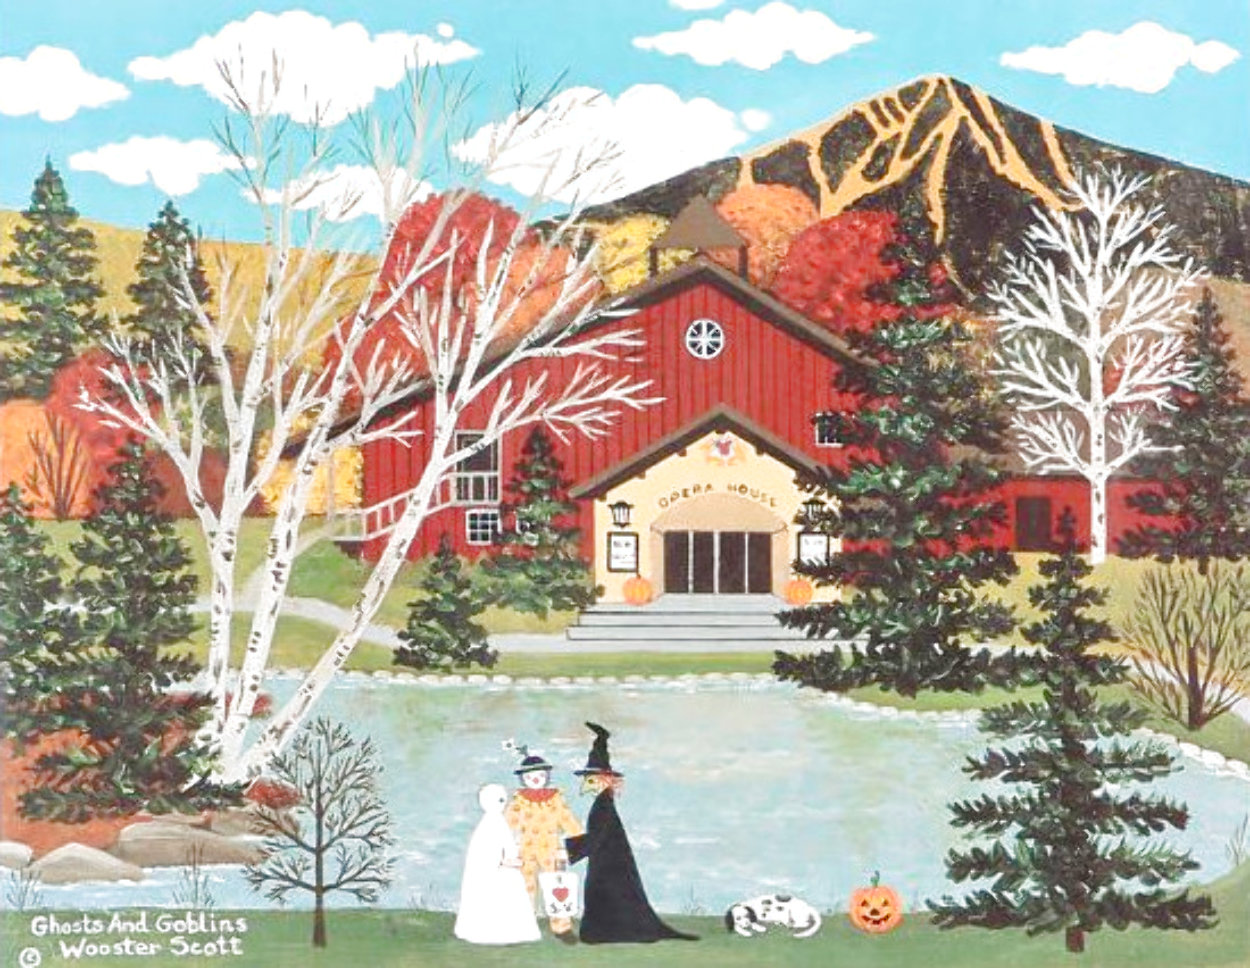 Ghosts And Goblins (Halloween) Sun Valley Idaho Limited Edition Print by Jane Wooster Scott